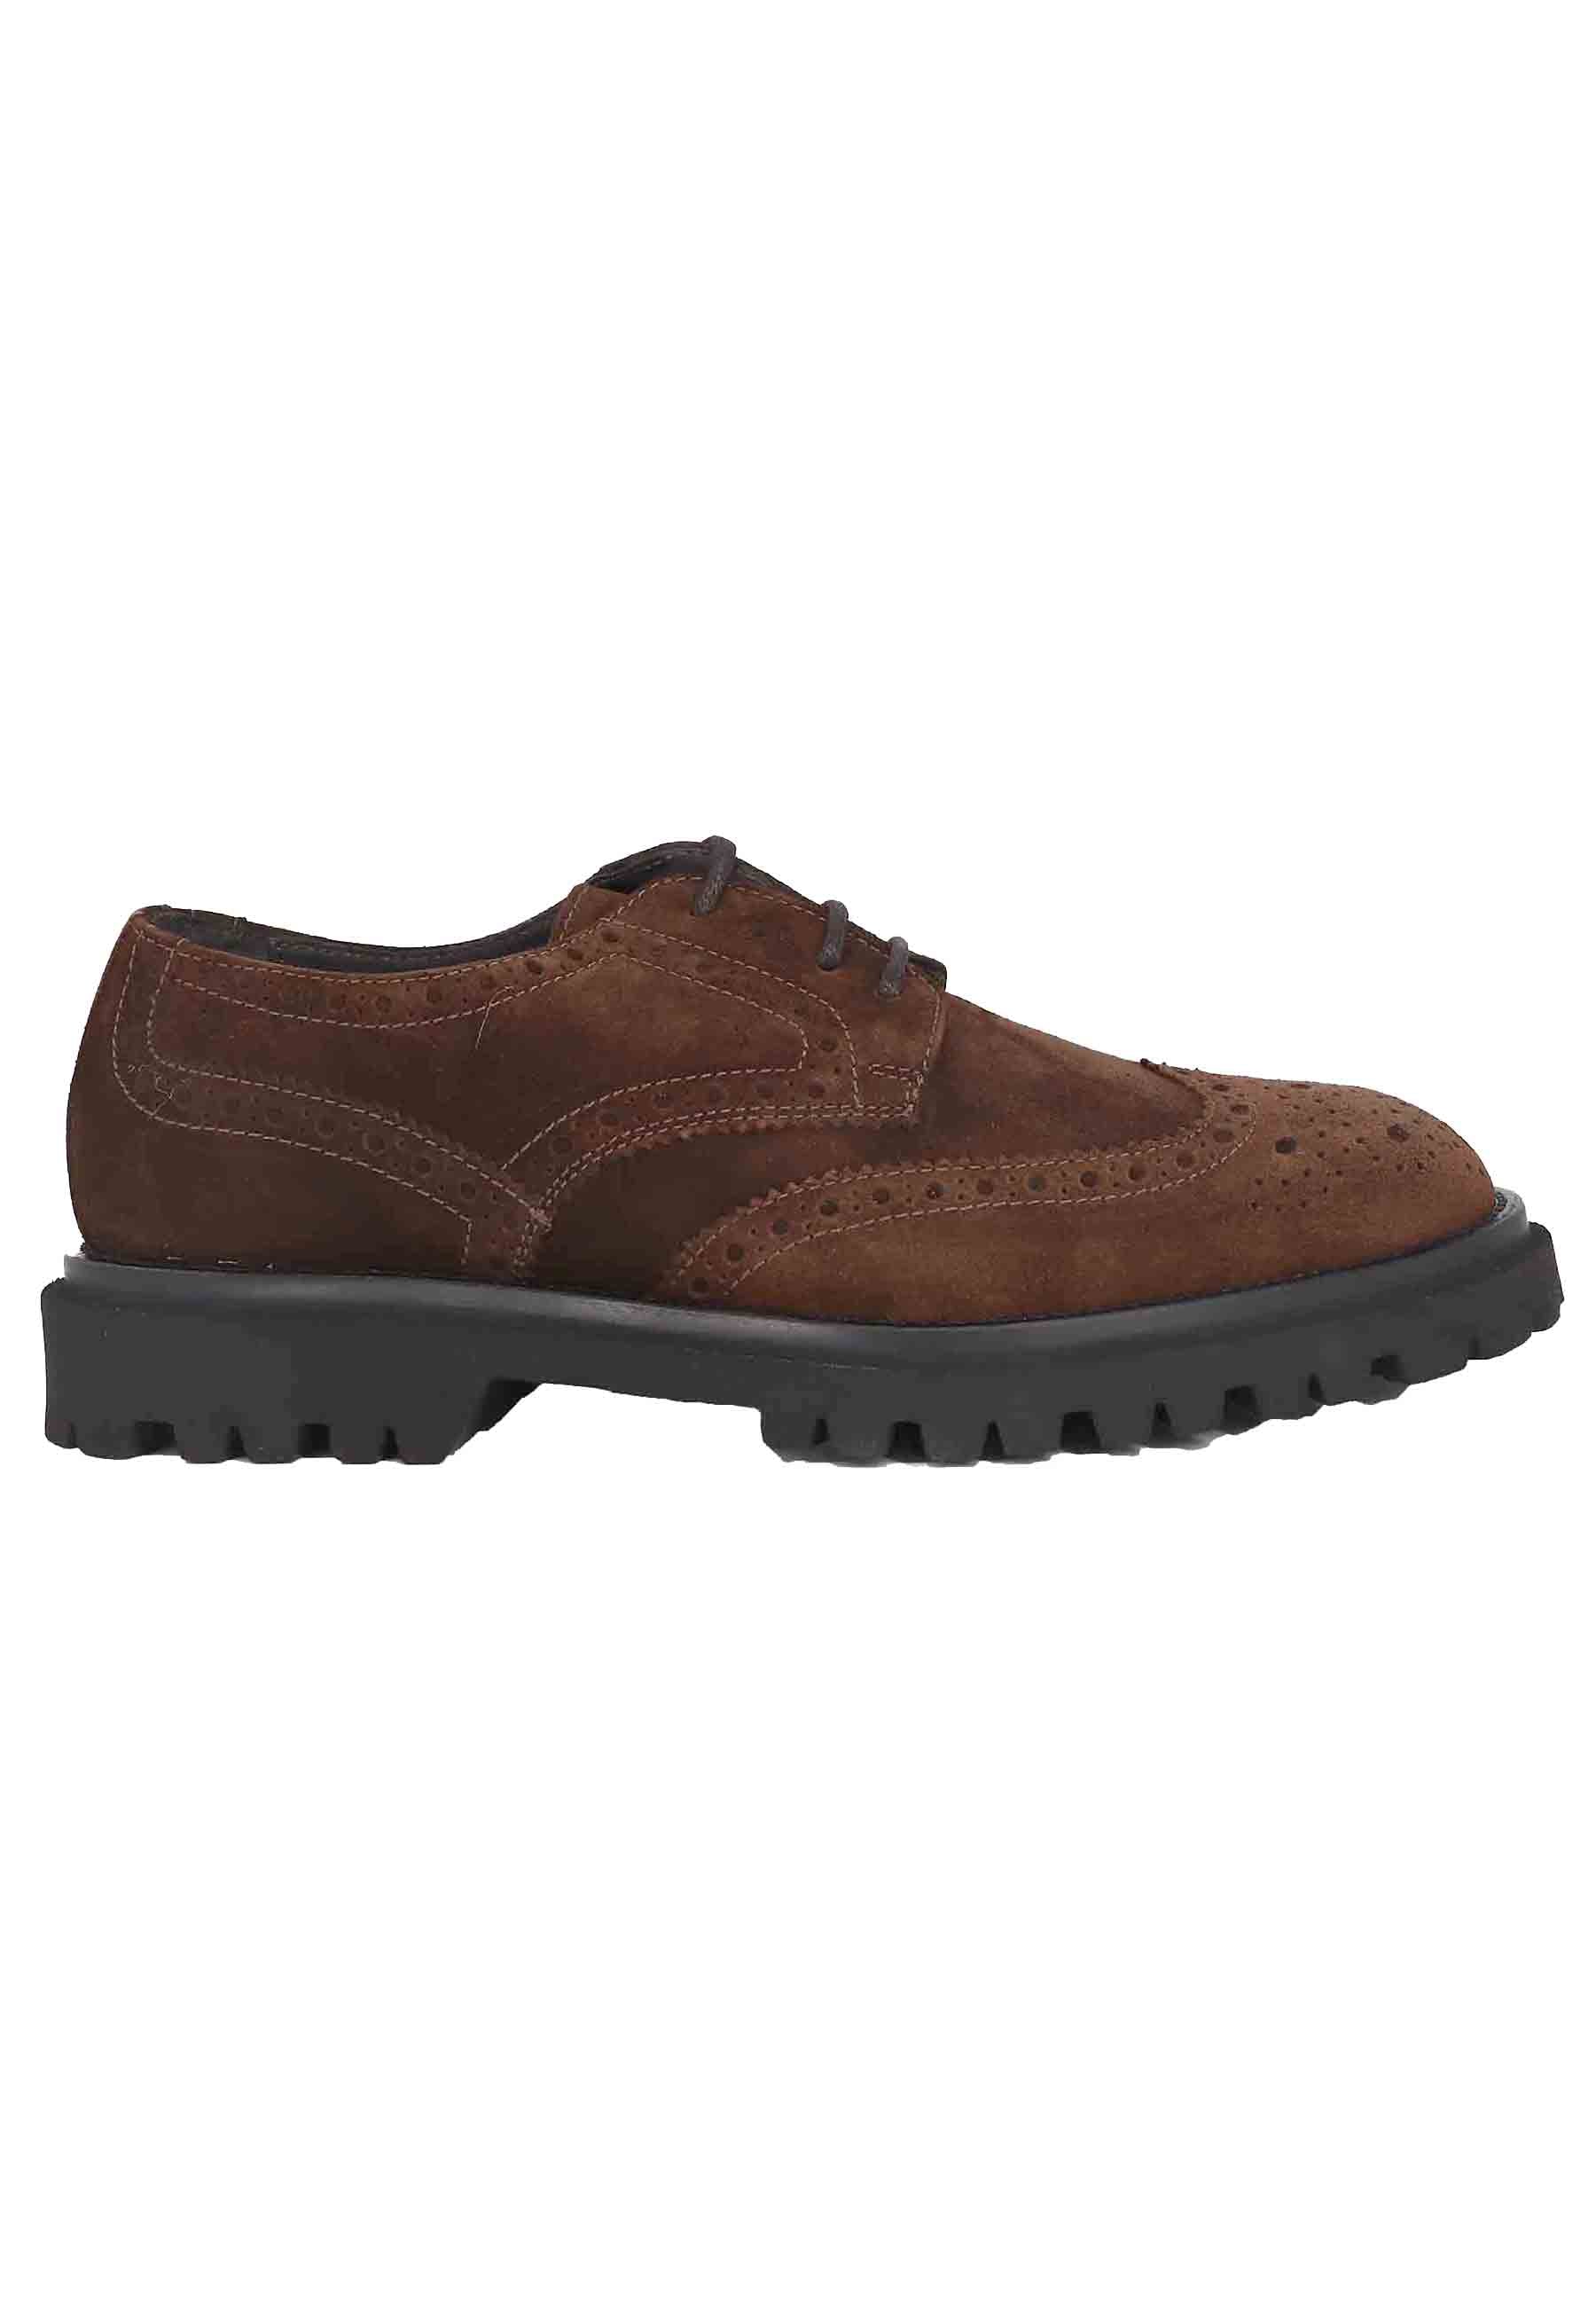 Men's lace-ups in dark brown suede with lug sole and stitching